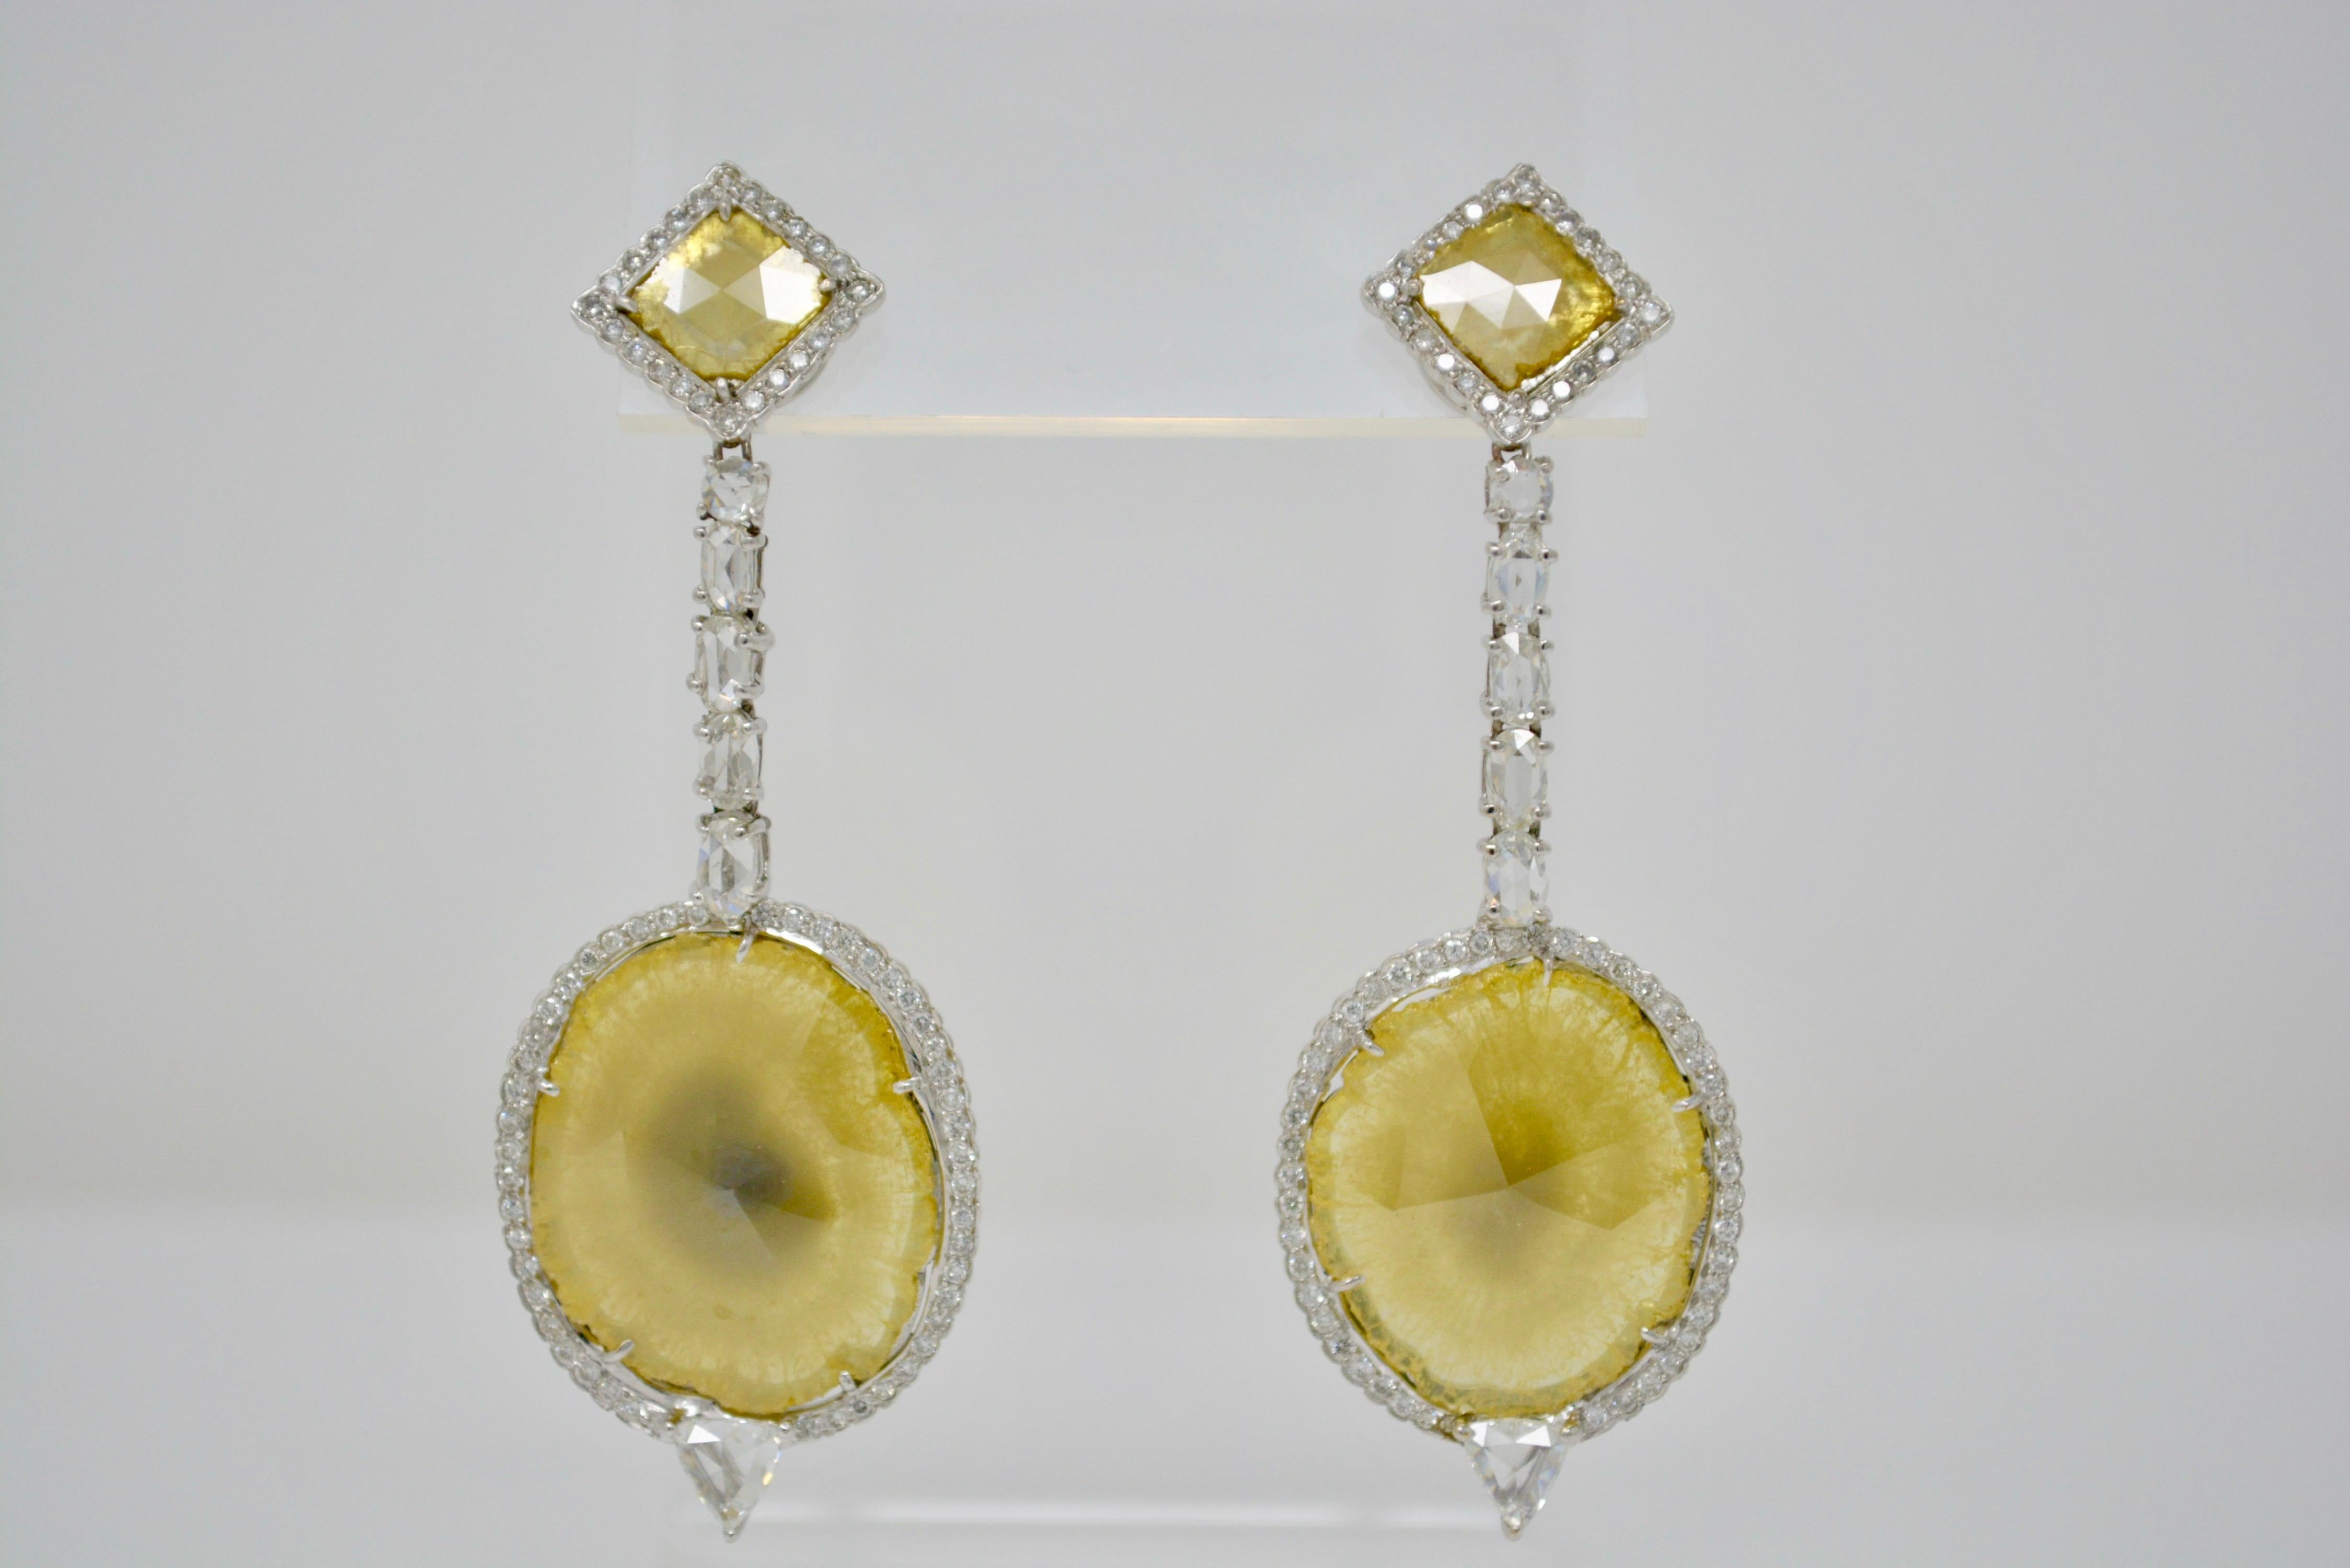 18.09 Carat Natural Yellow Slice Diamond and White Diamond Earrings For Sale 3